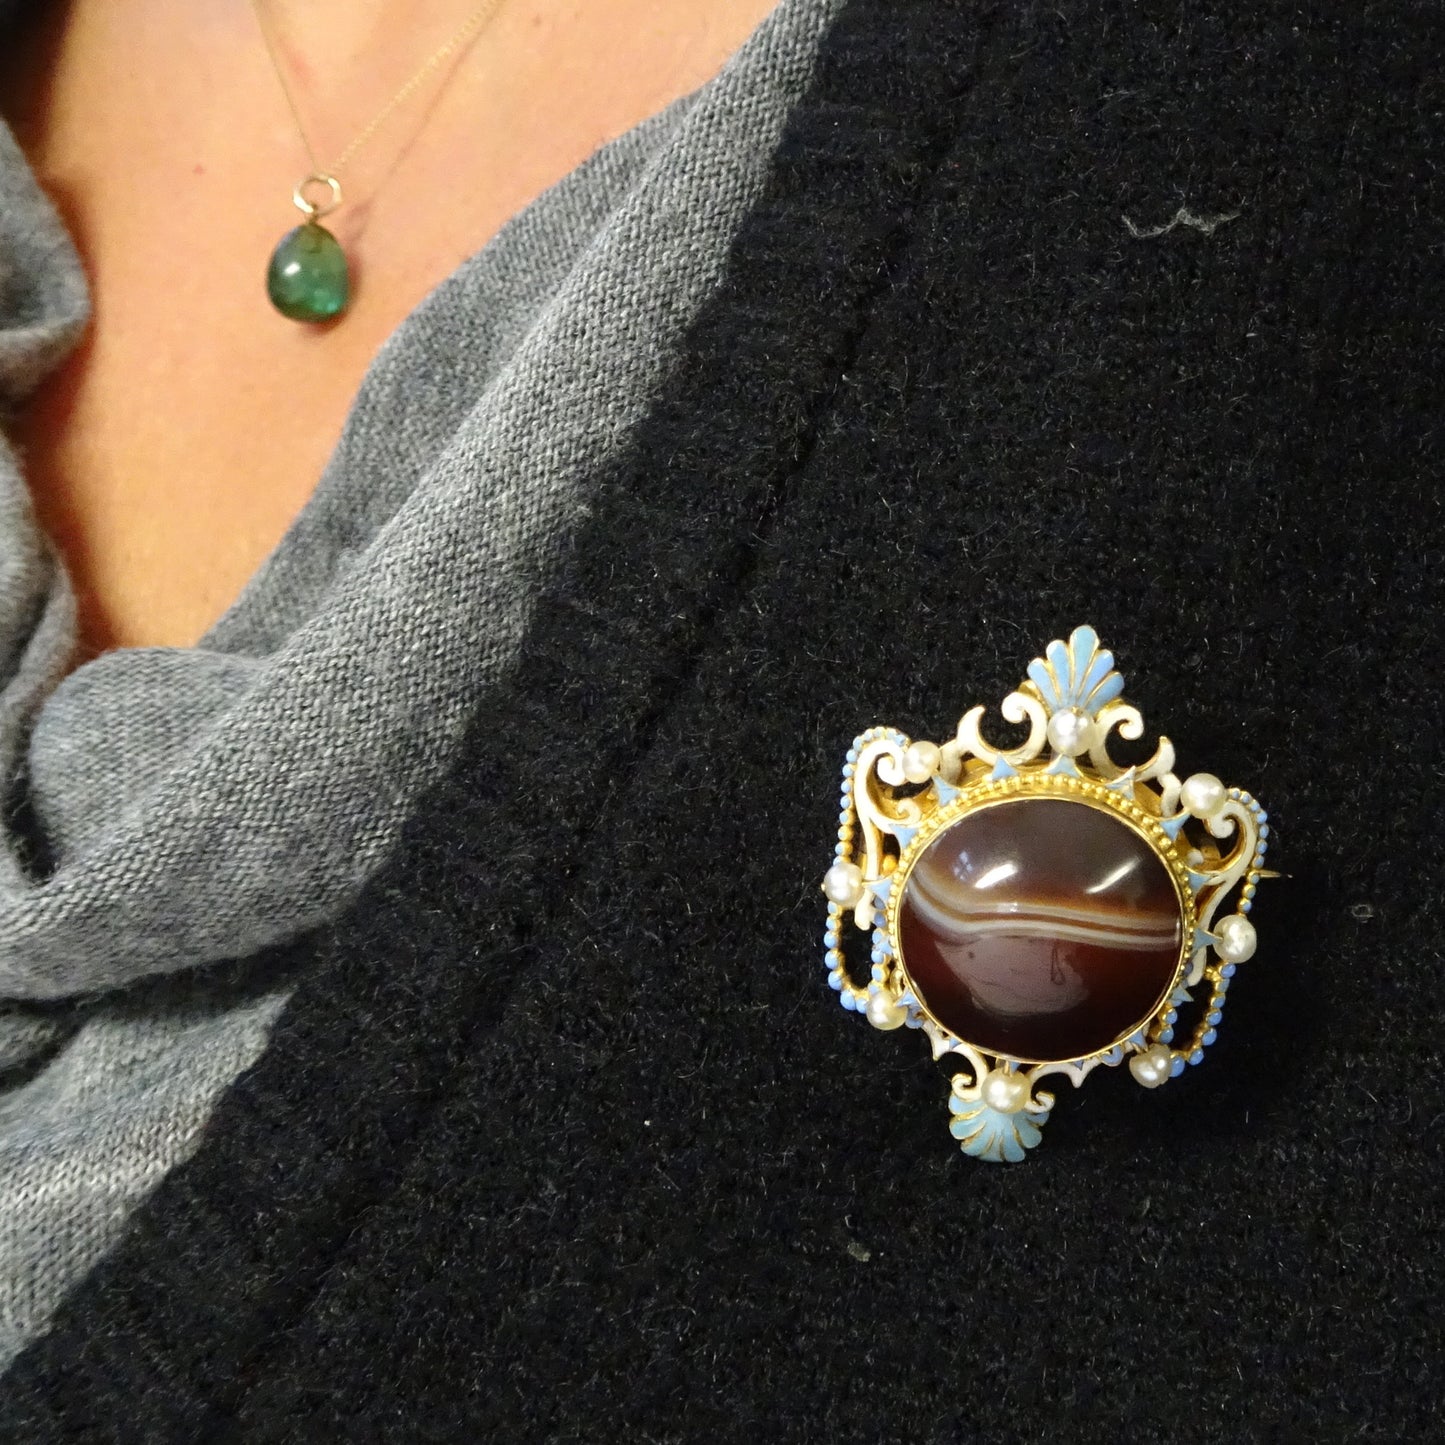 Antique 18KT Yellow Gold Carnelian Agate, Enamel & Natural Pearl Brooch on blouse